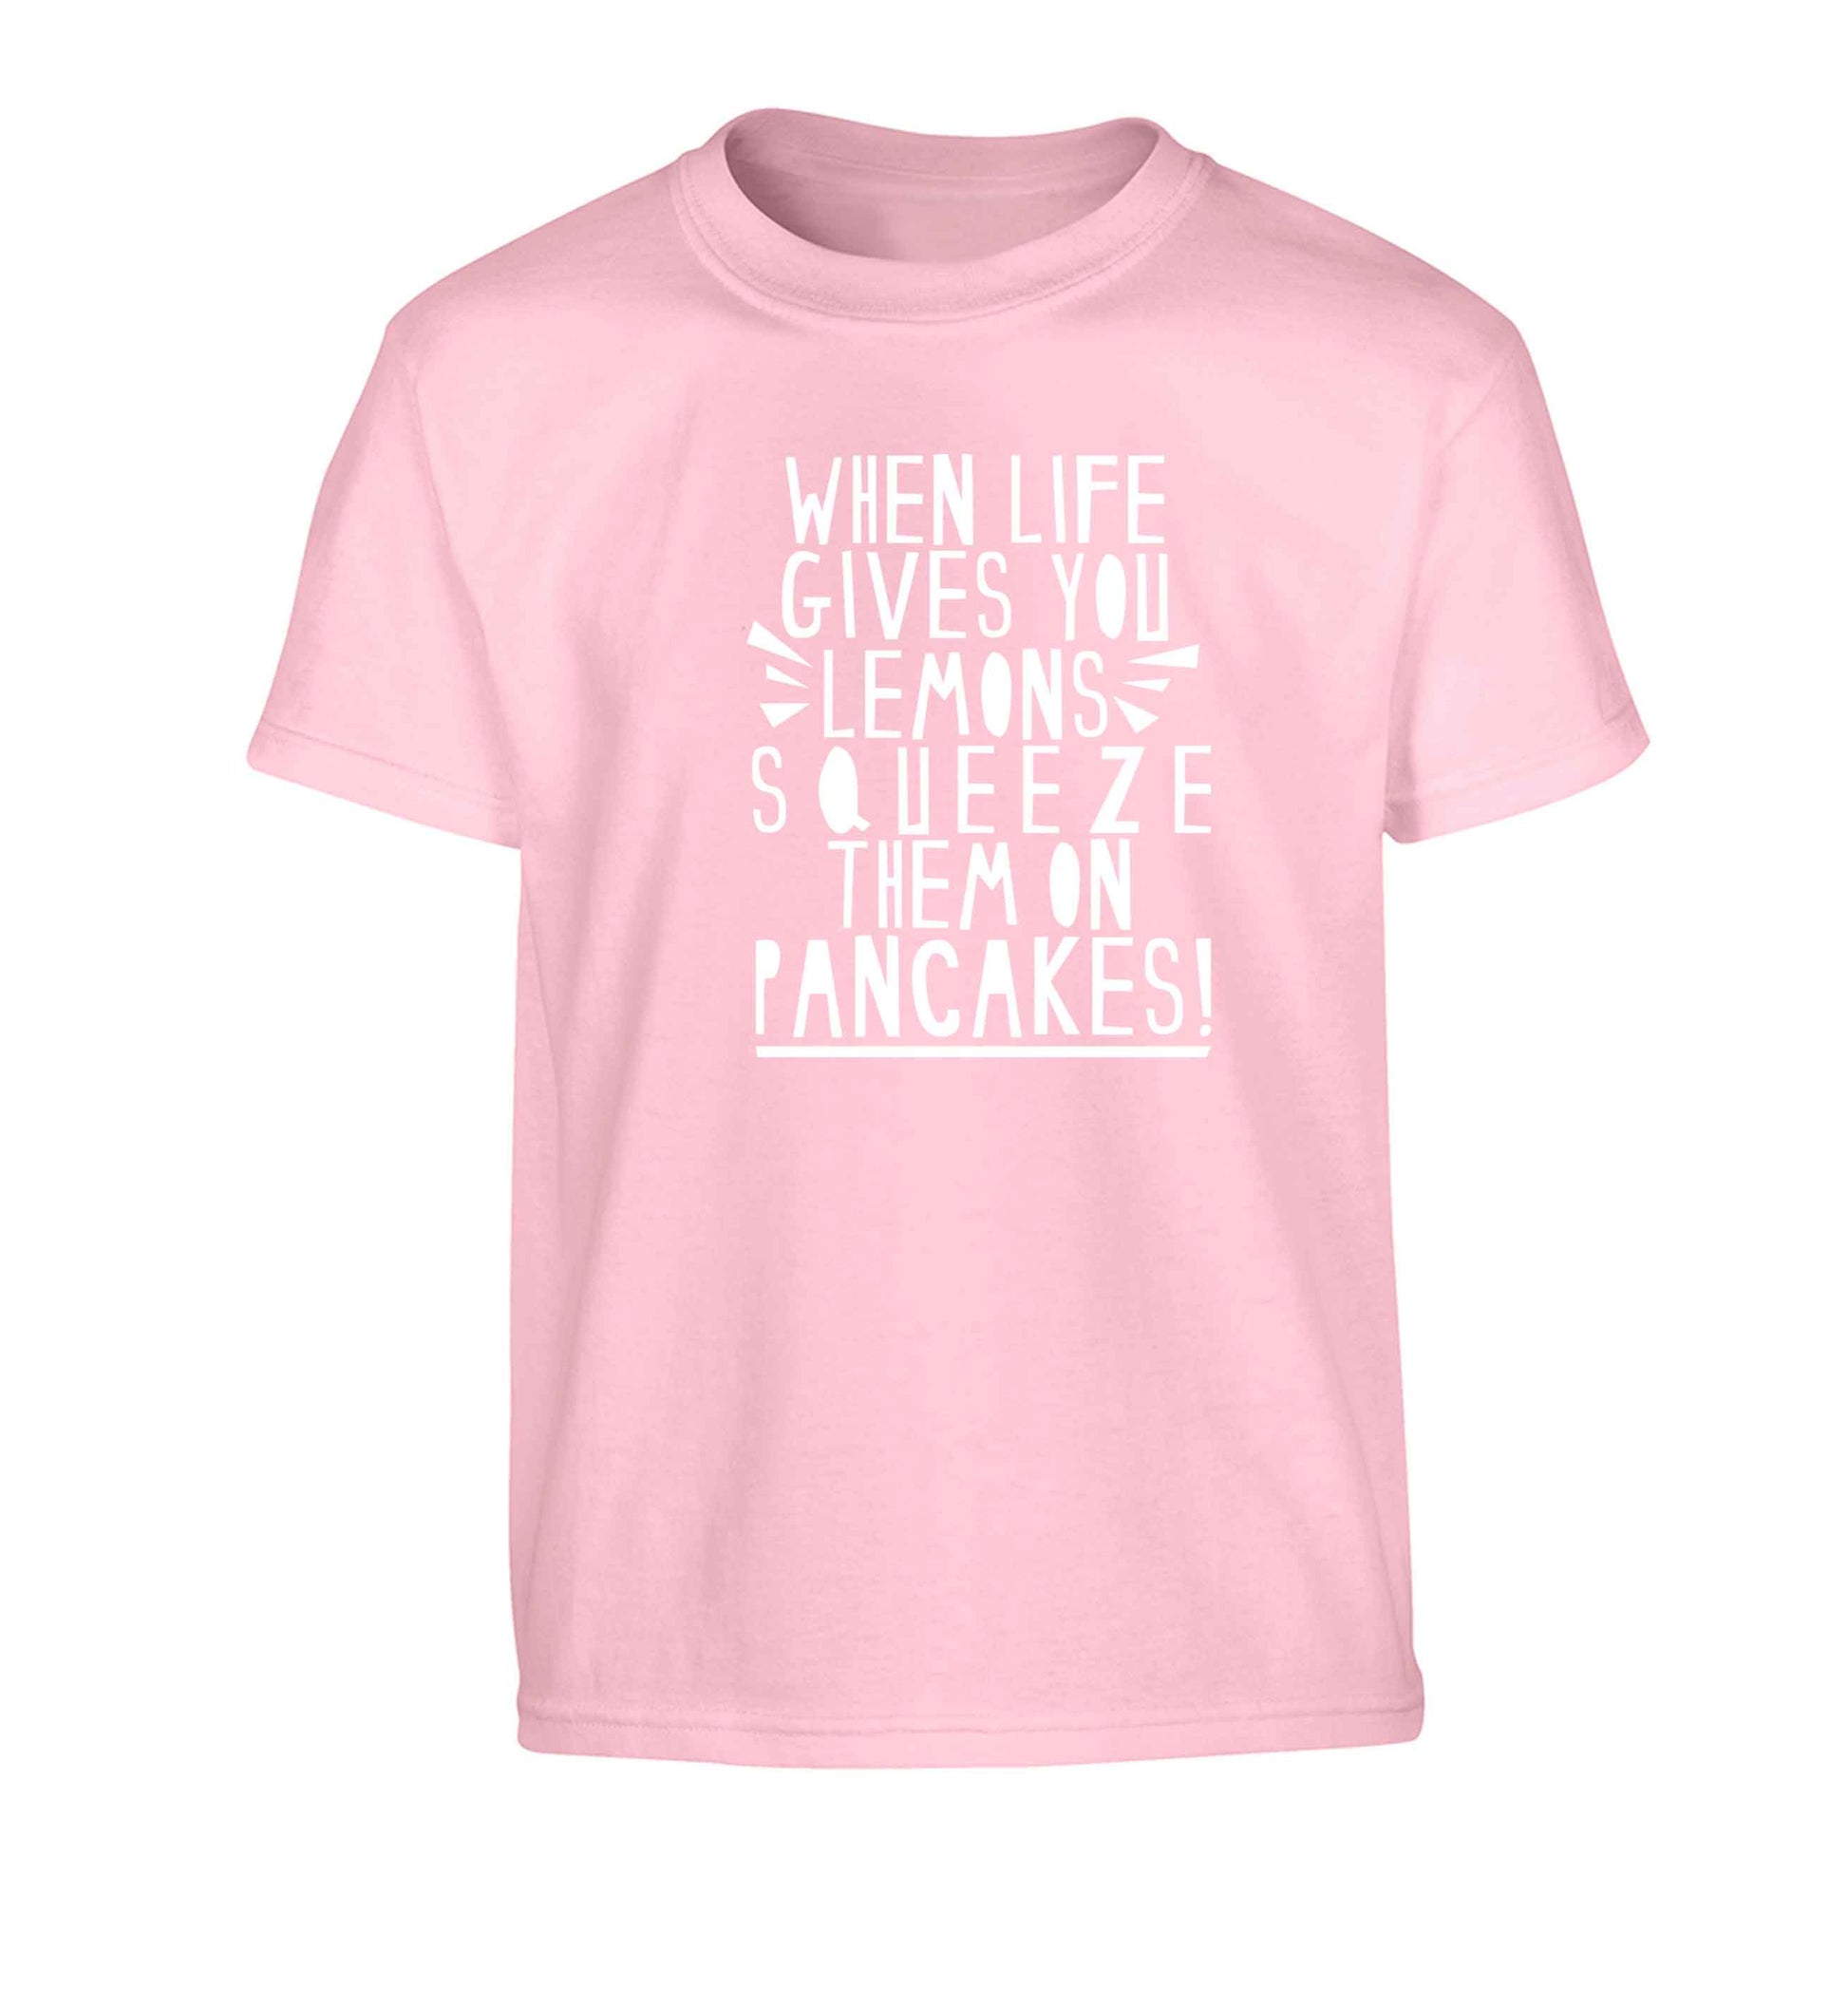 When life gives you lemons squeeze them on pancakes! Children's light pink Tshirt 12-13 Years